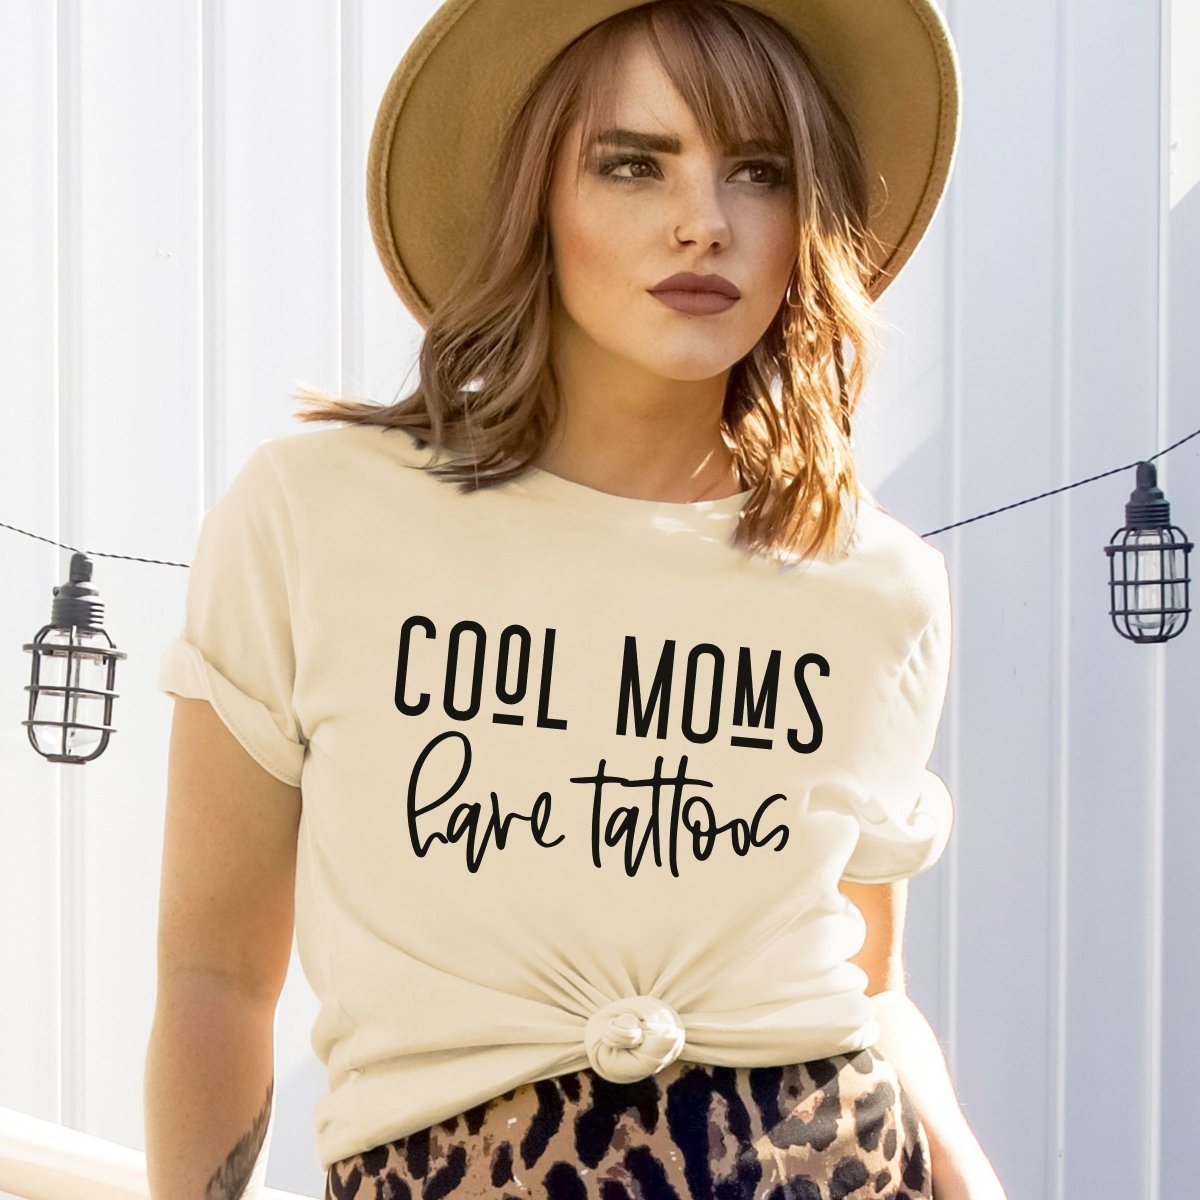 Cool Moms have tattoos Tee - Limeberry Designs